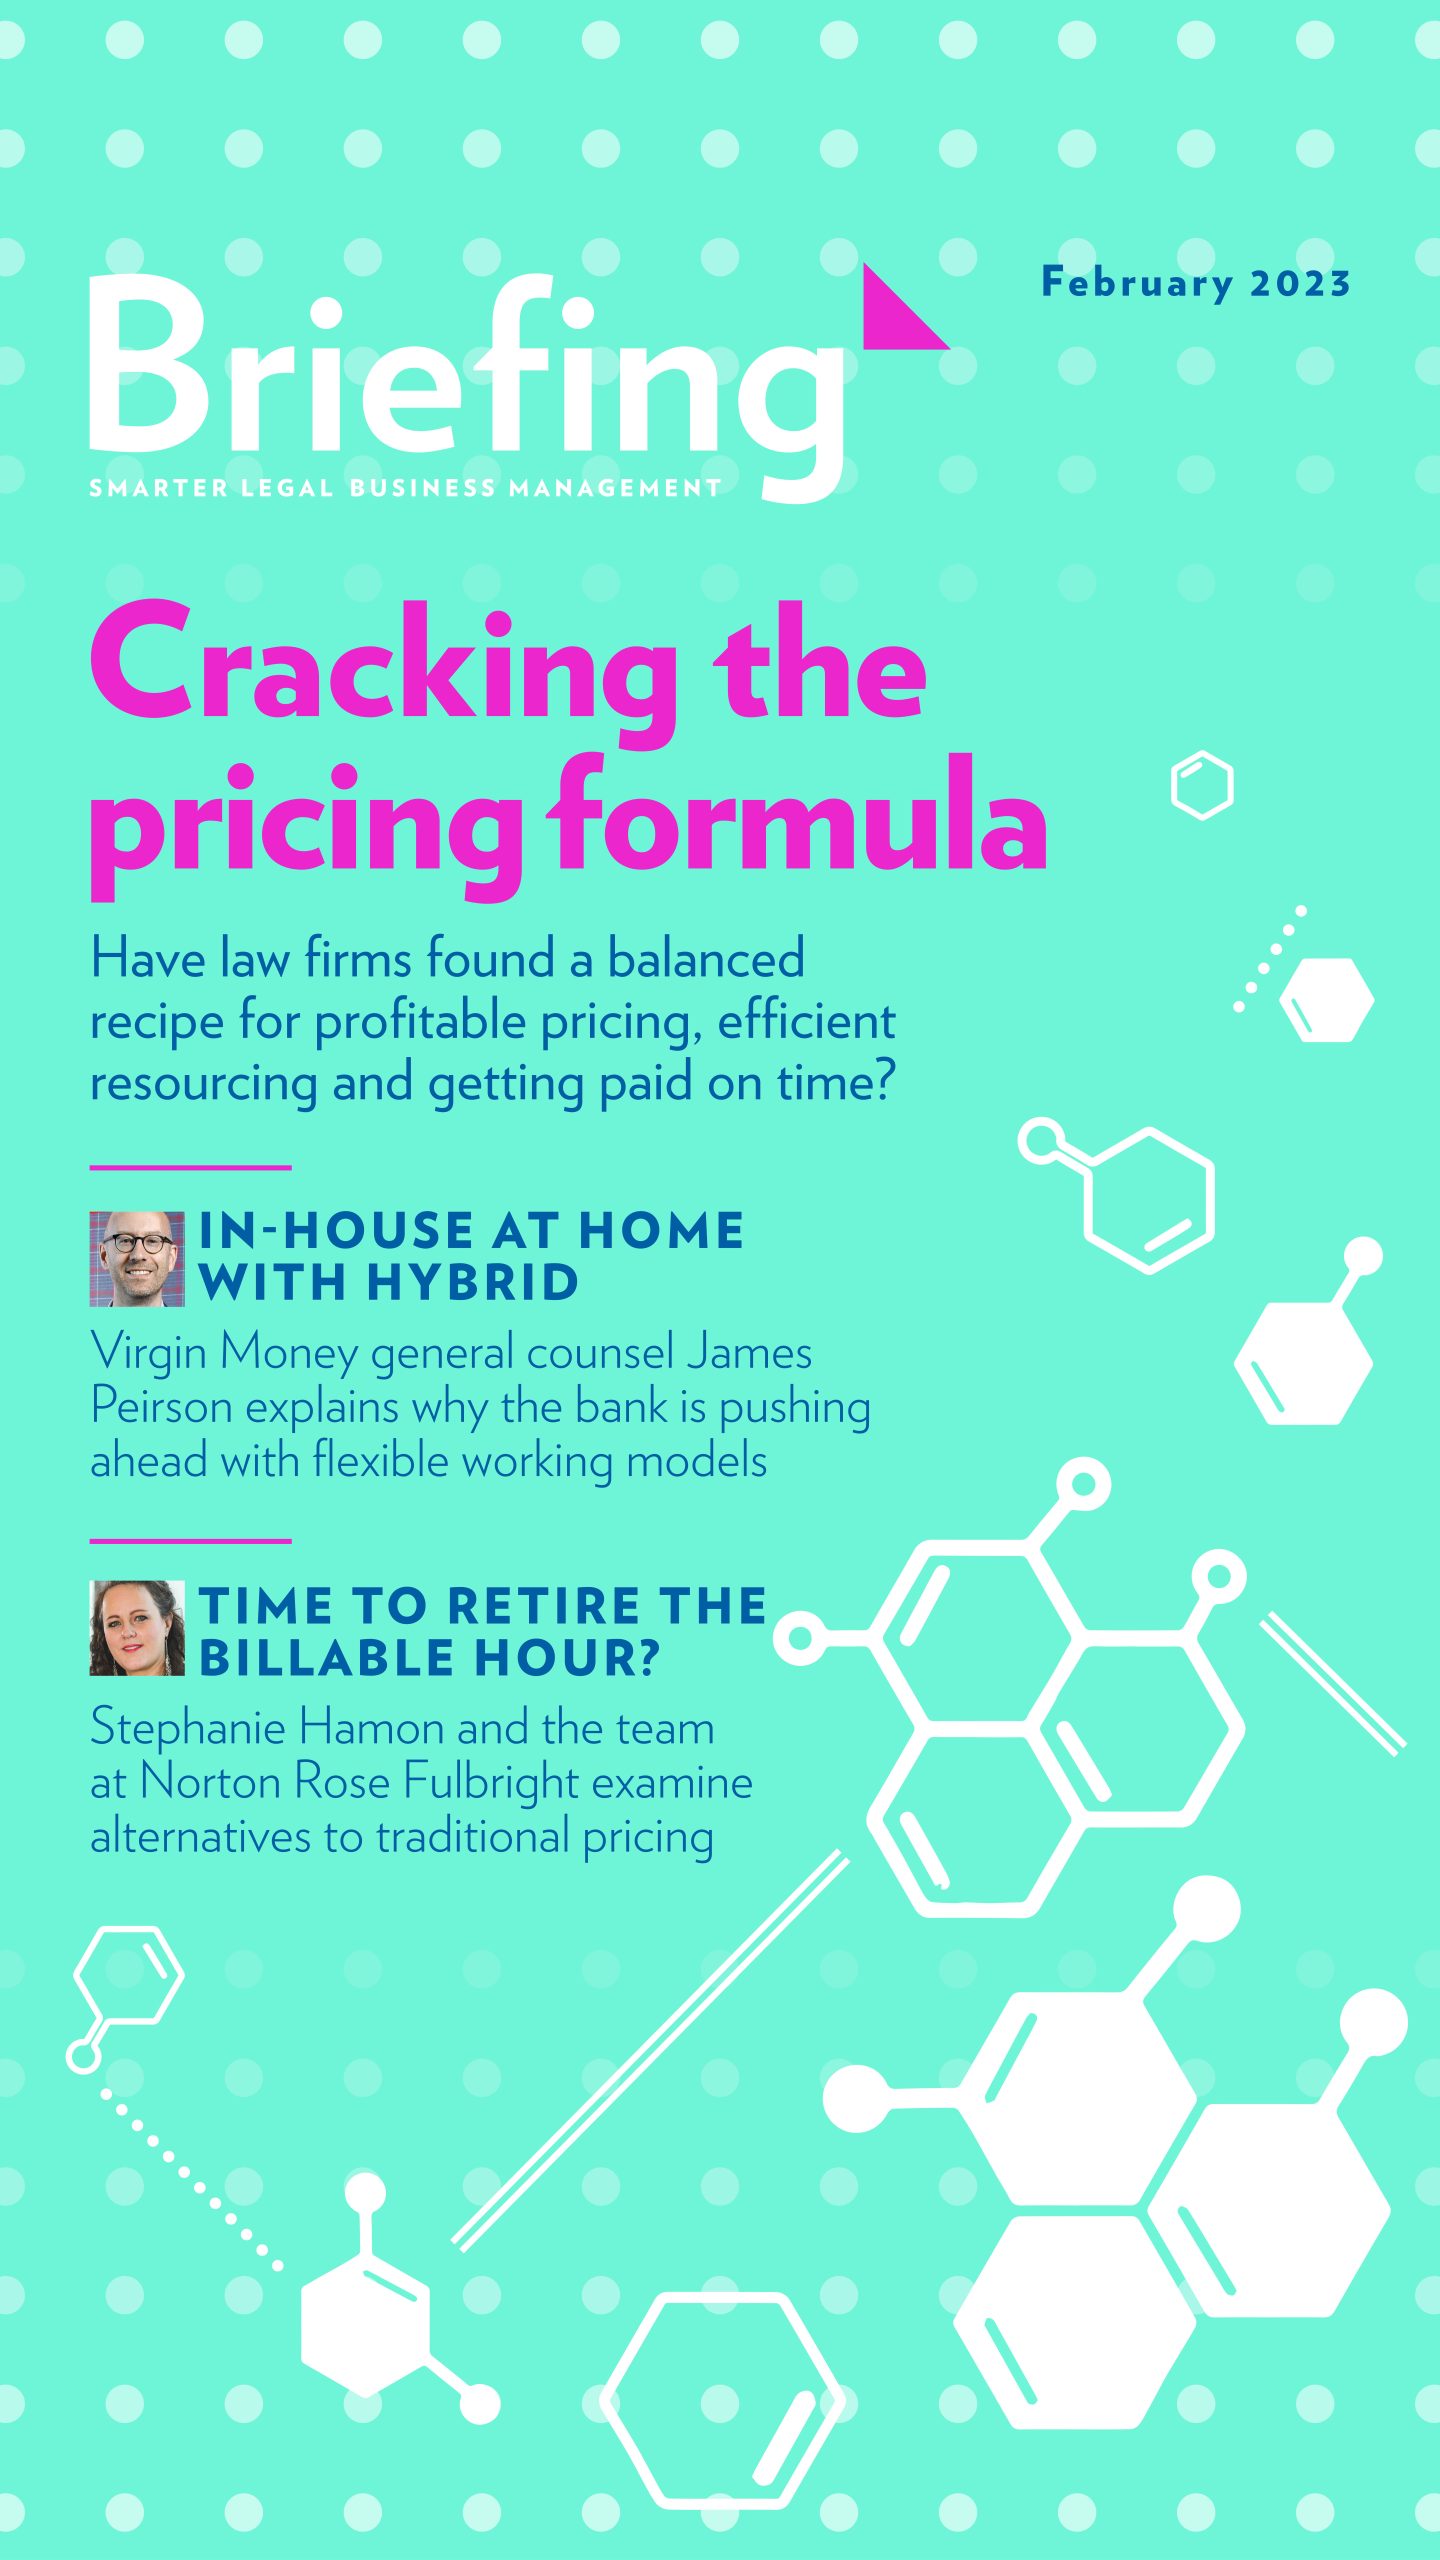 Cracking the pricing formula